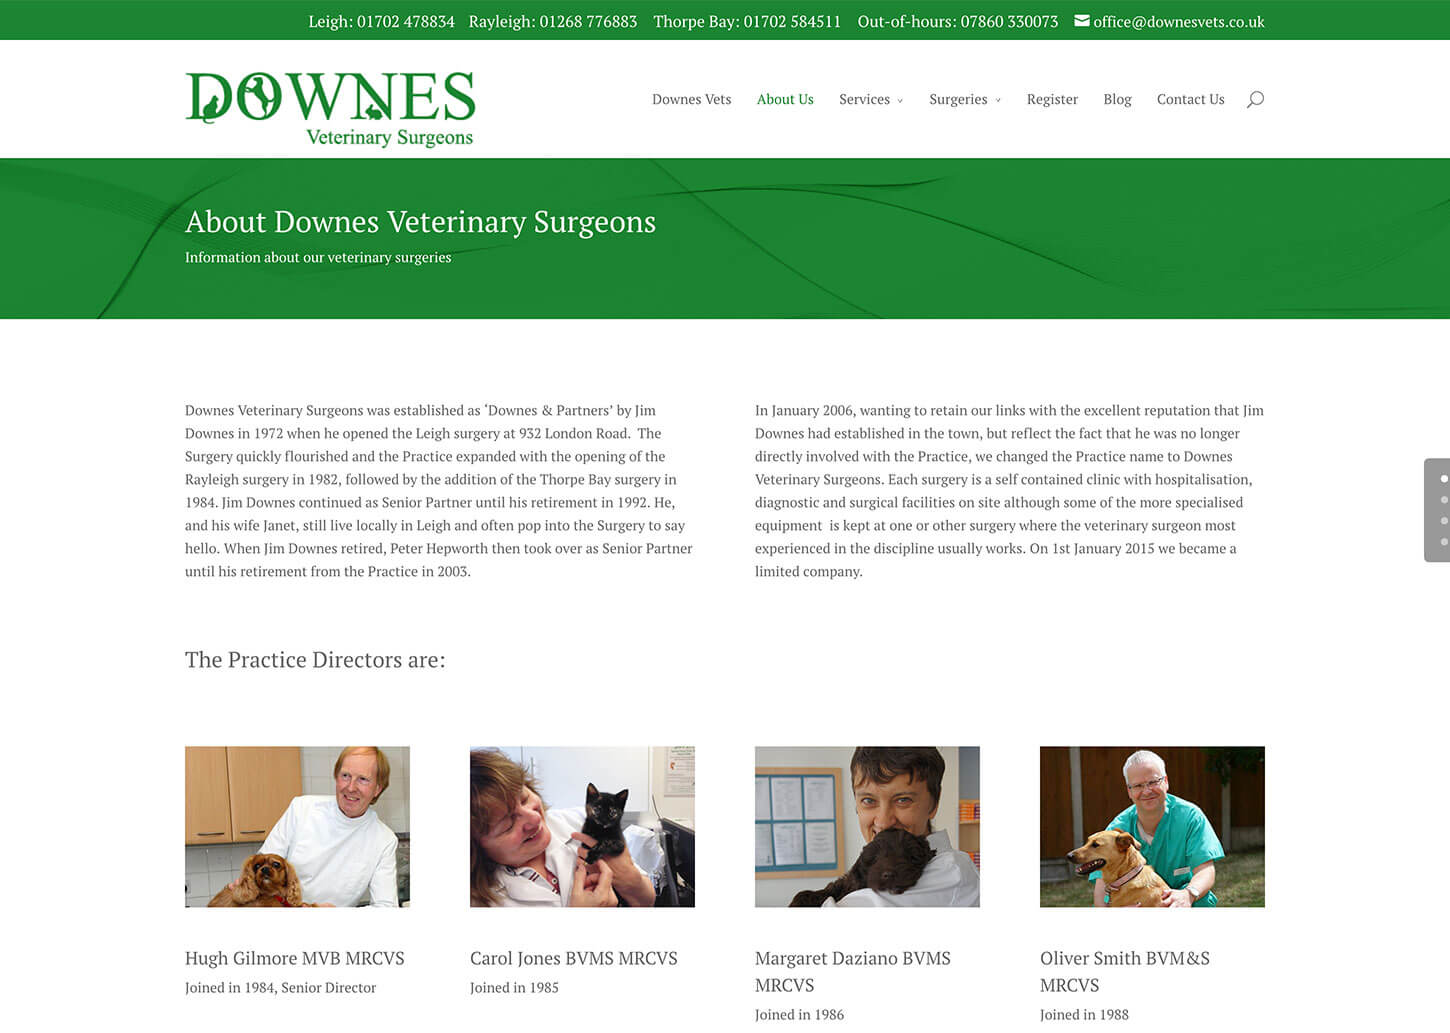 Vets website design for Downes Vets: About us page